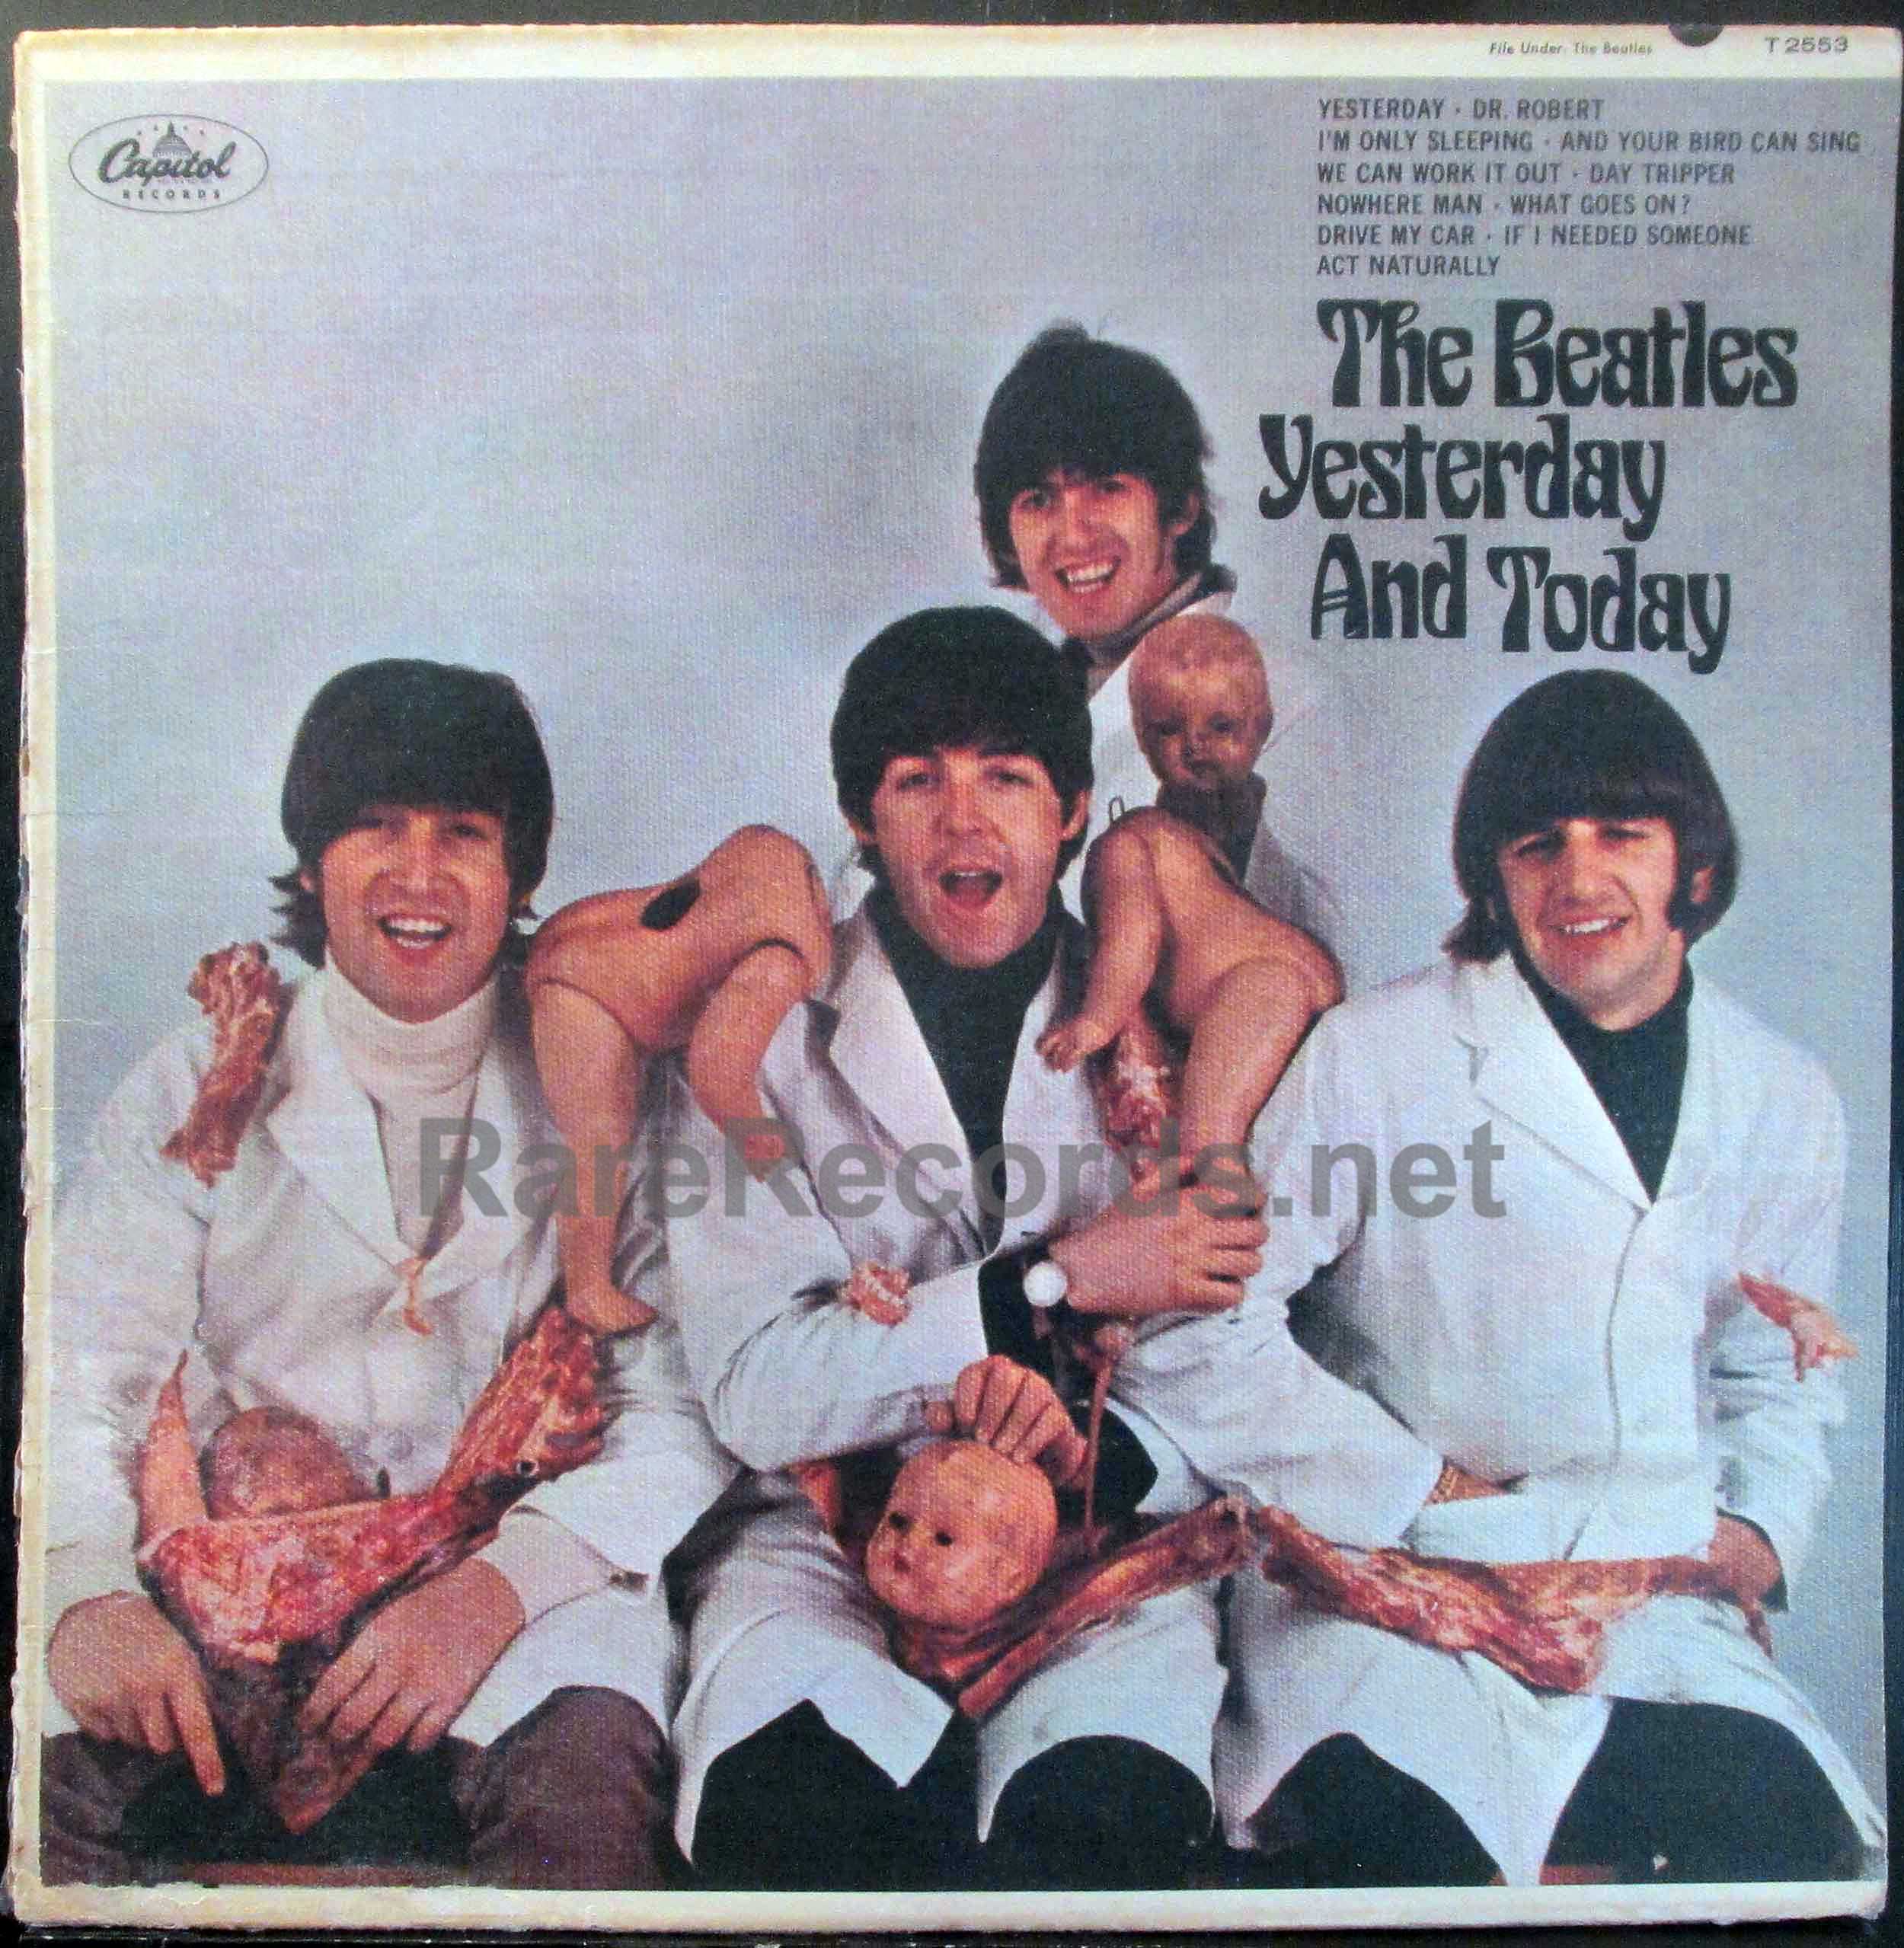 beatles - yesterday and today butcher cover lp